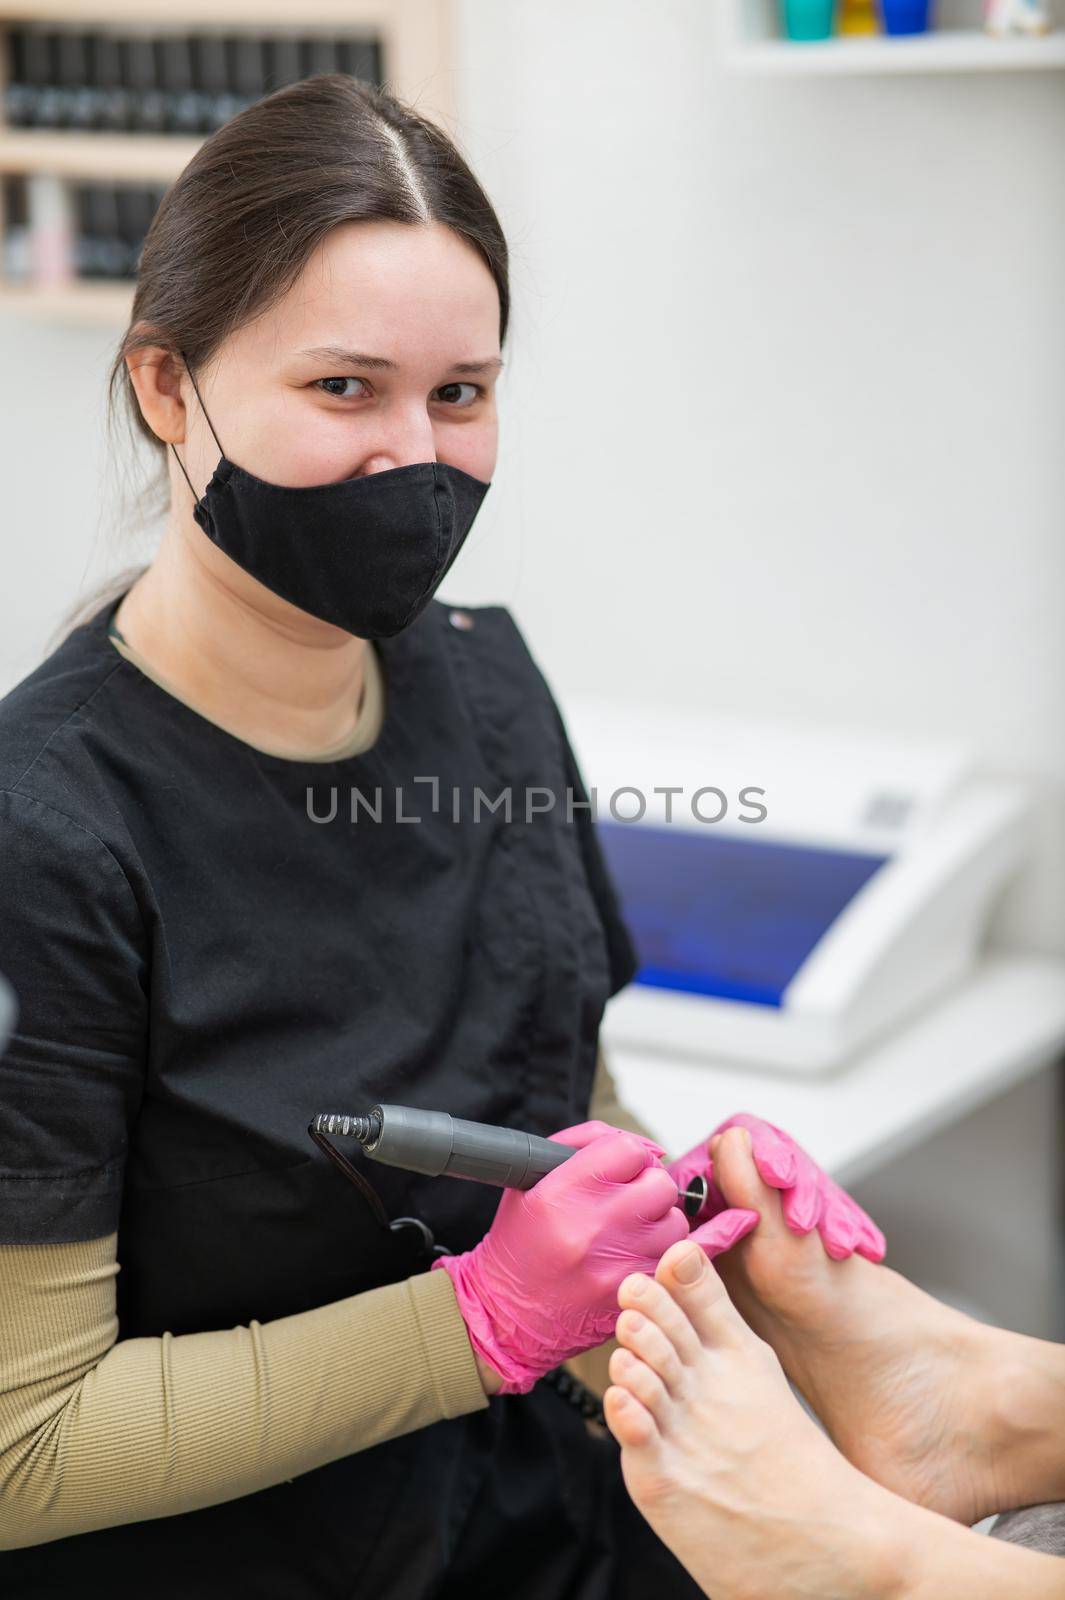 The pedicure master processes the client's foot using an apparatus with an abrasive disc